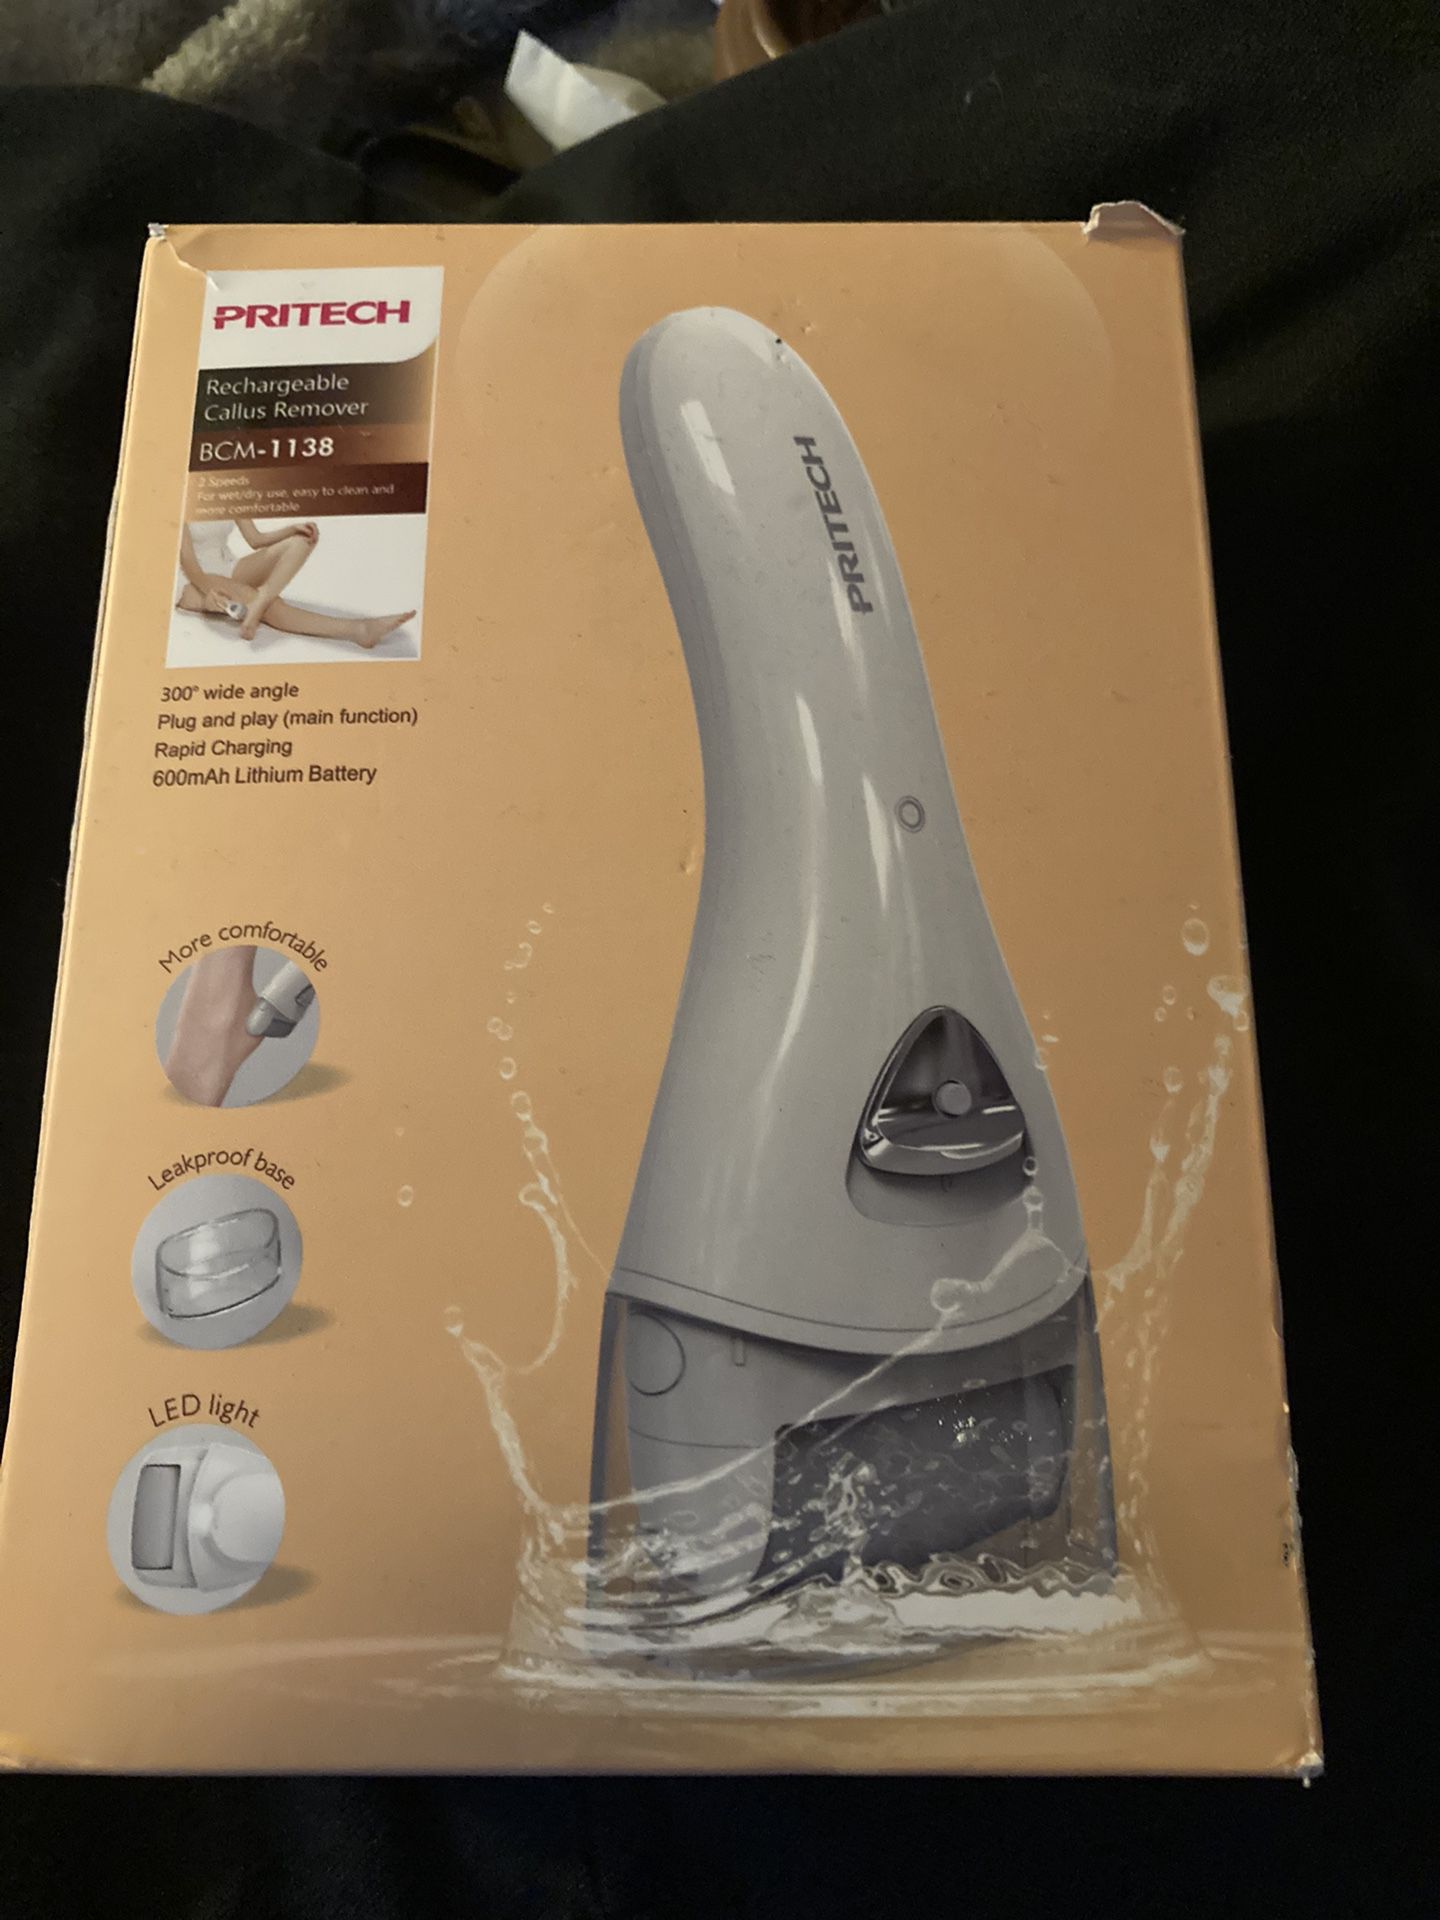 Pritech Rechargeable Callus Remover